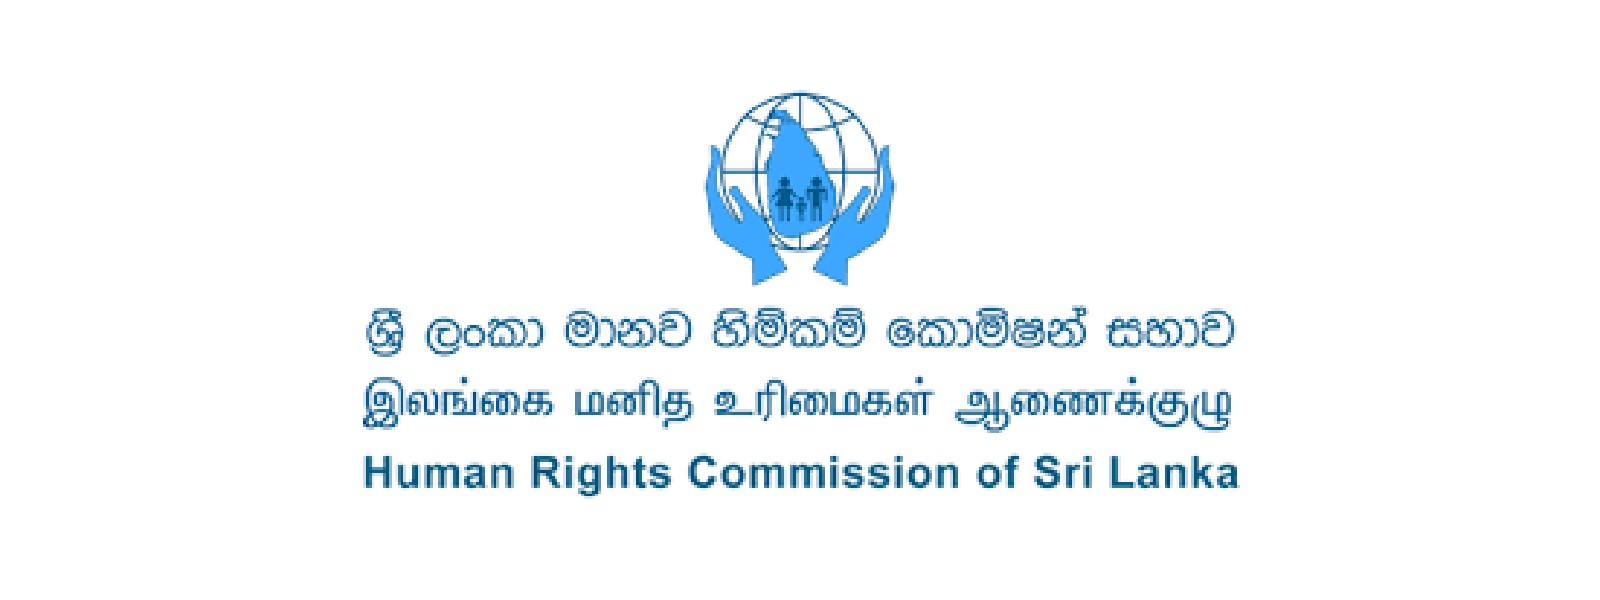 HRCSL requests info on detainees